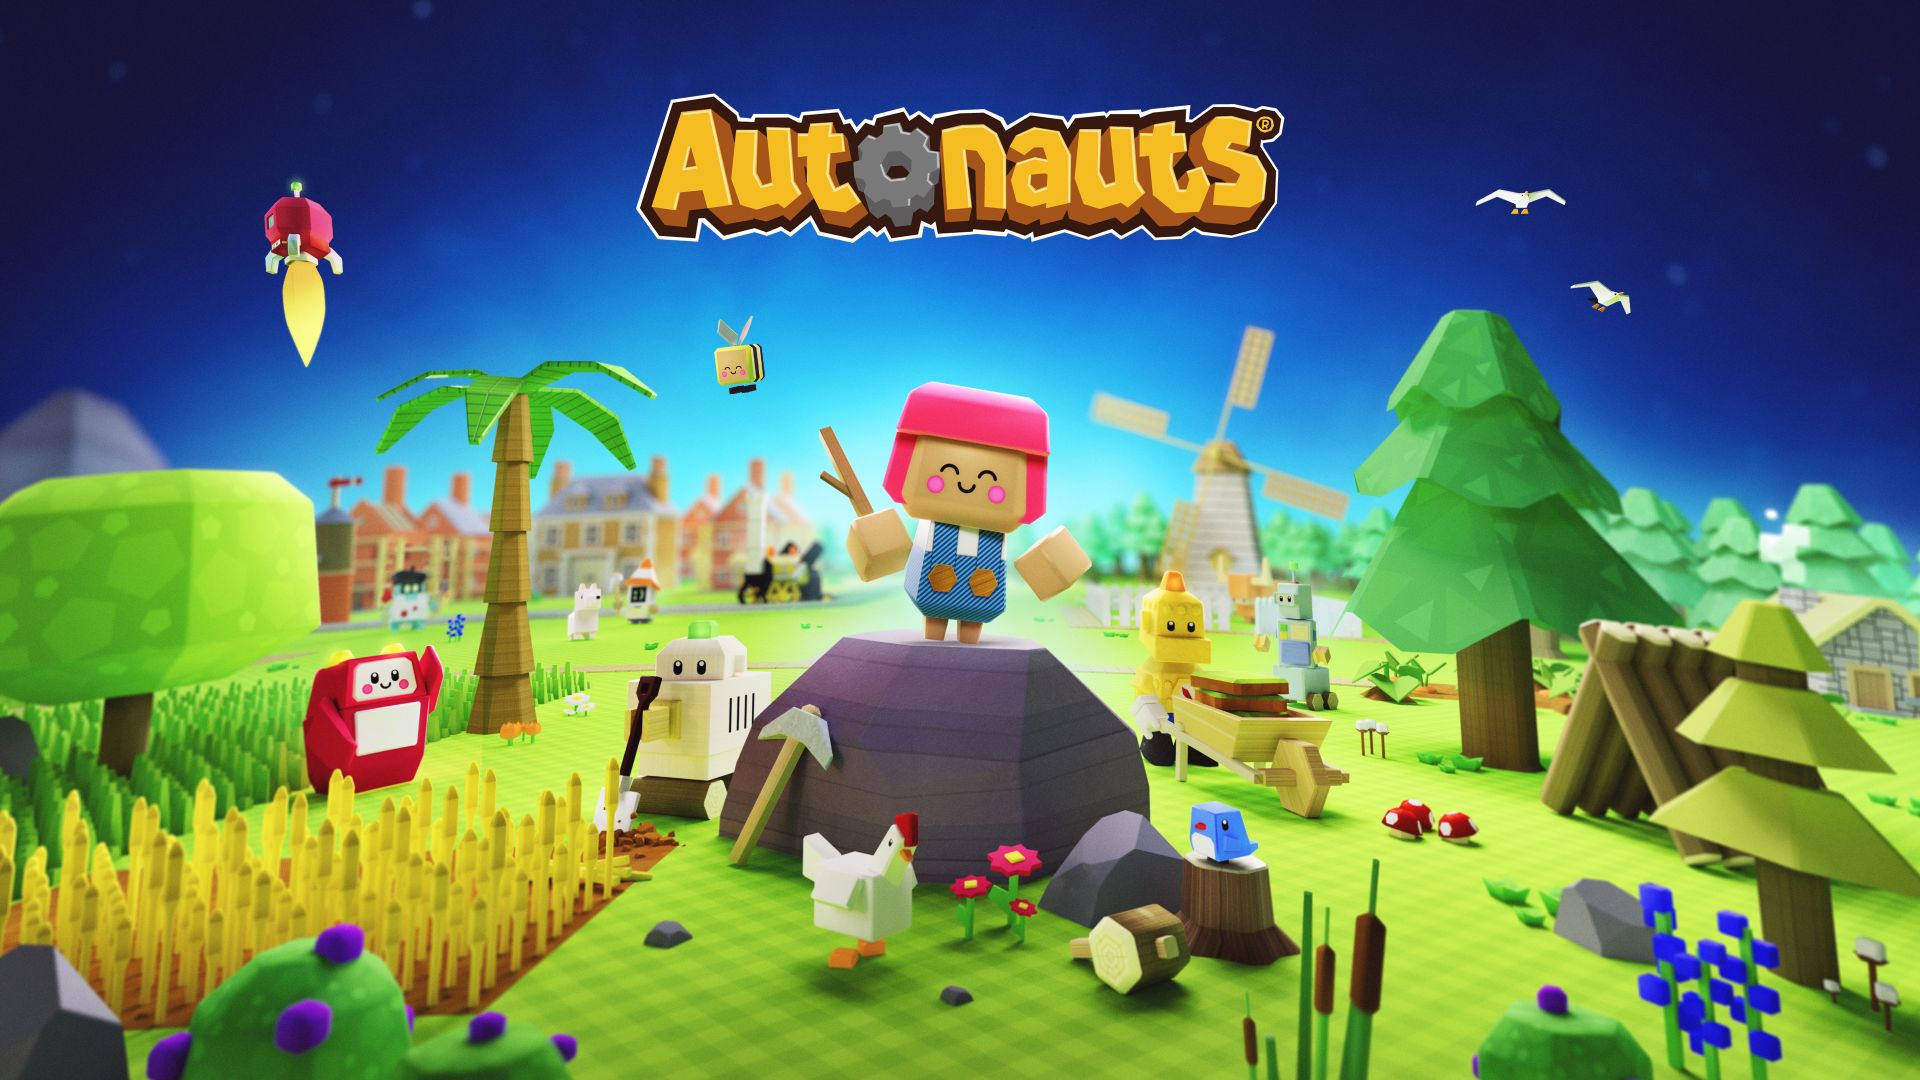 Video For Autonauts Has Landed on Xbox